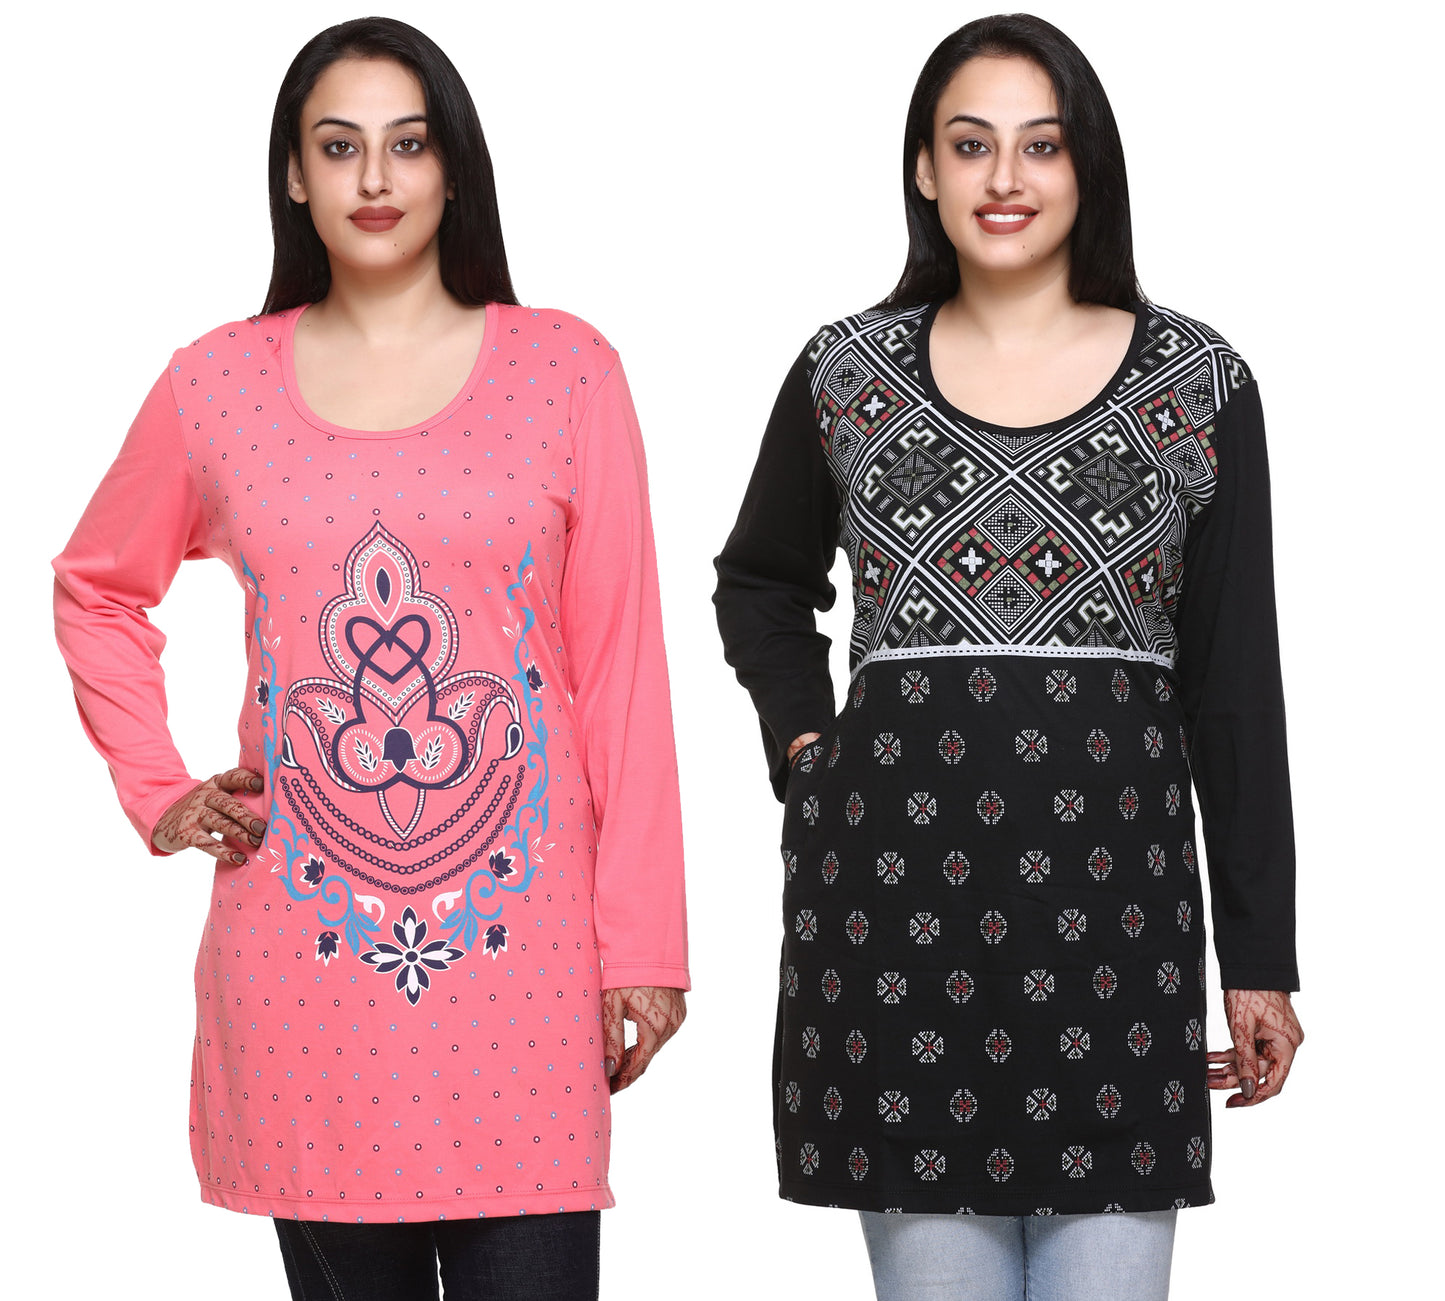 Plus Size Printed Long Tops For Women Full Sleeves - Pack of 2 (Pink & Blue)